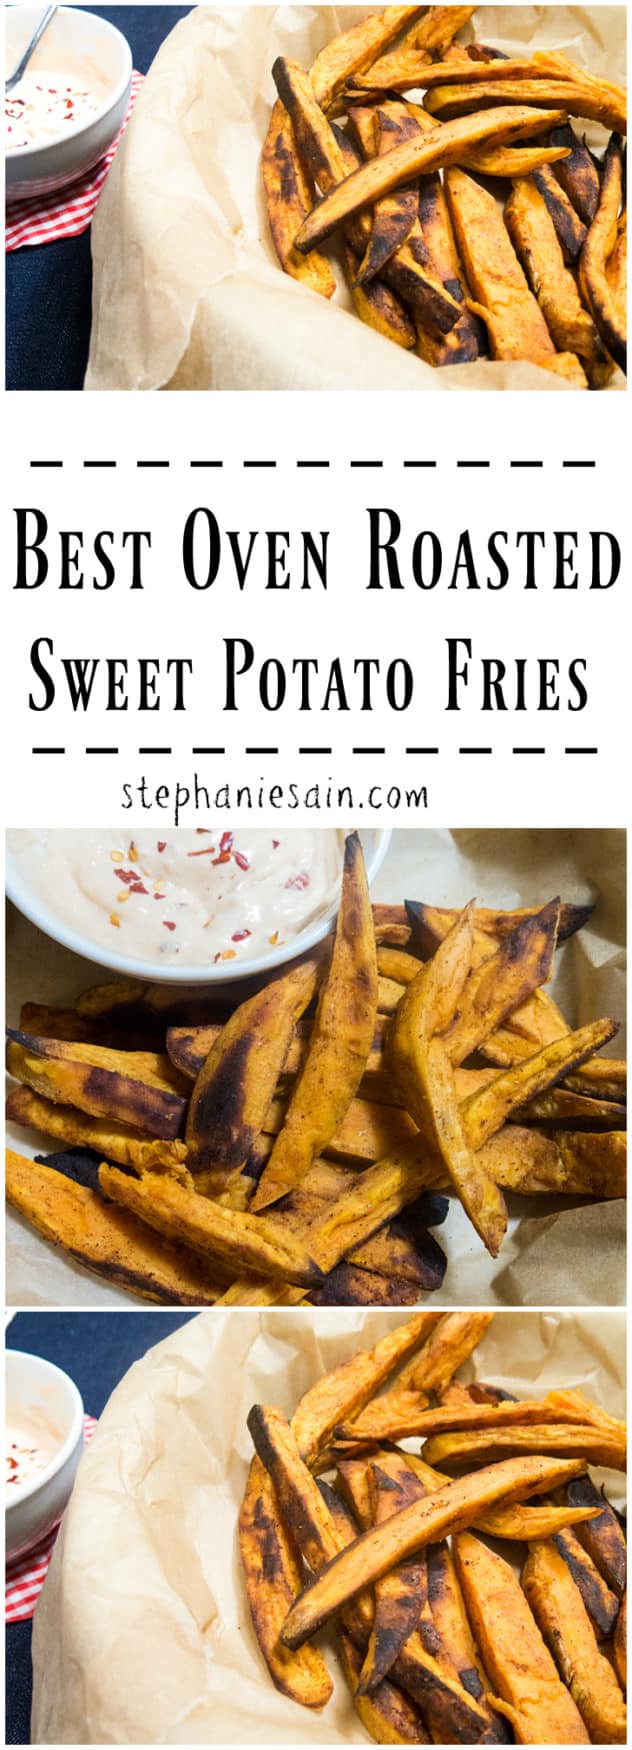 Best Oven Roasted Sweet Potato Fries are a healthier tasty option for fries. They are the perfect blend of sweet and savory. Vegetarian and Gluten Free.